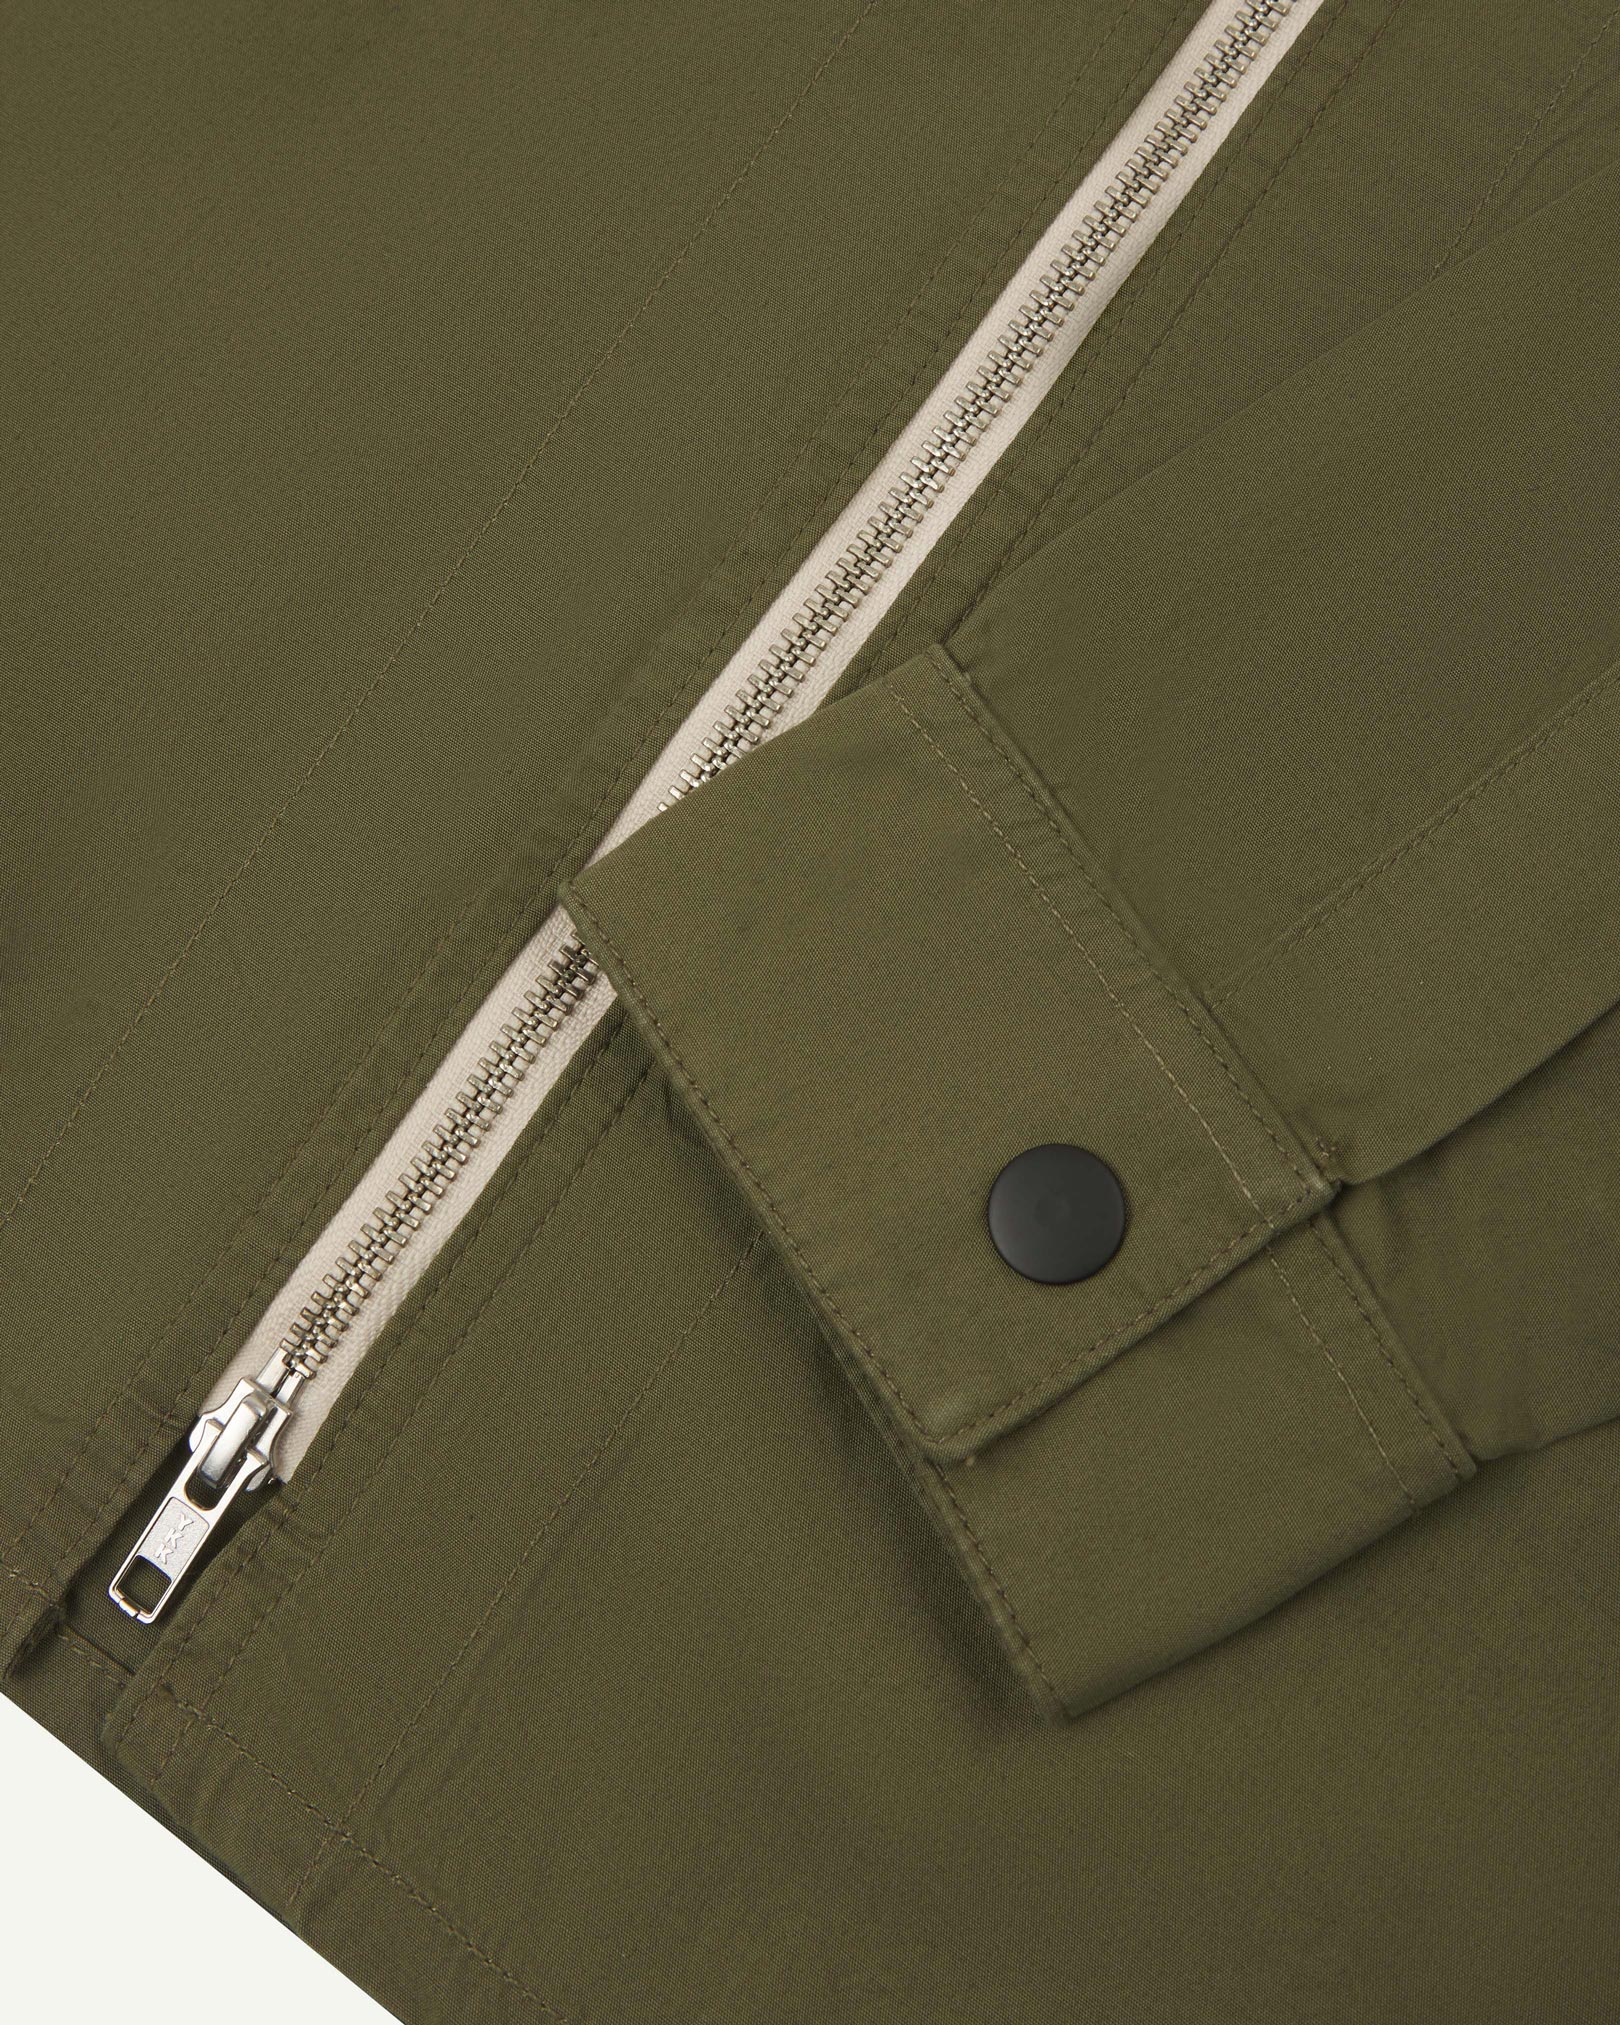 View of the mid-section of the olive-green 6002 lightweight jacket from Uskees, with focus on the cuff and front zipper detail.